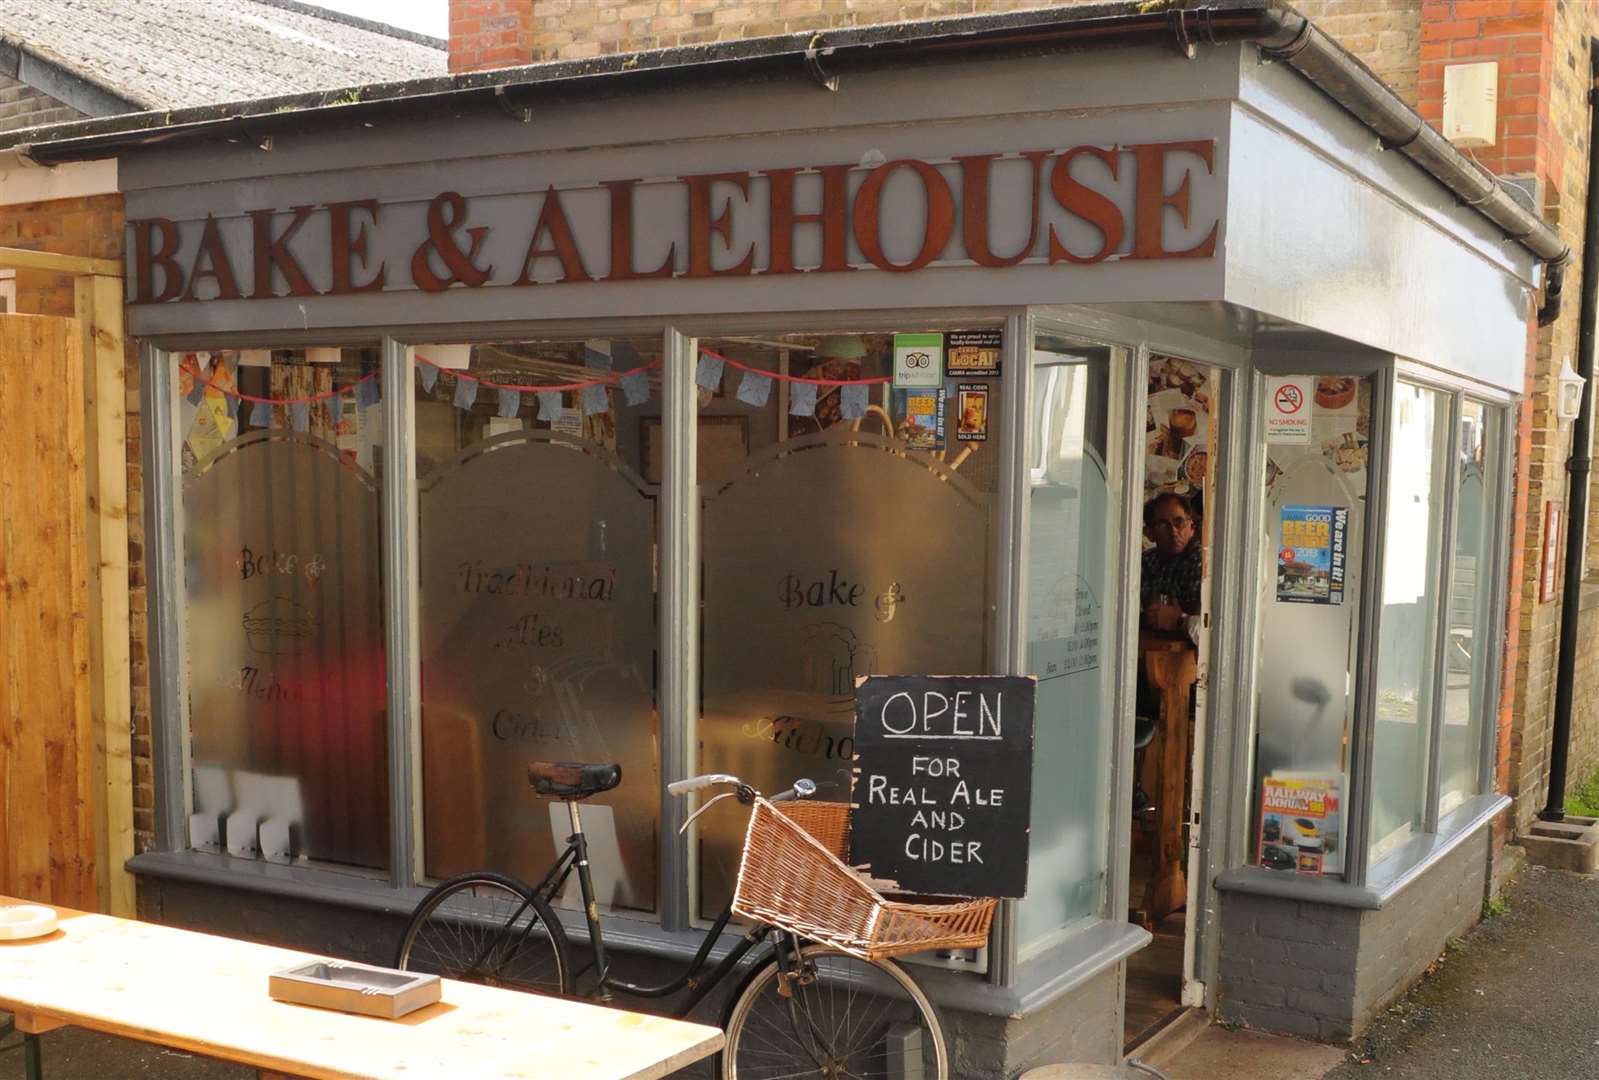 The Bake & Alehouse micropub in Westgate, inspired Mike to open his own venue